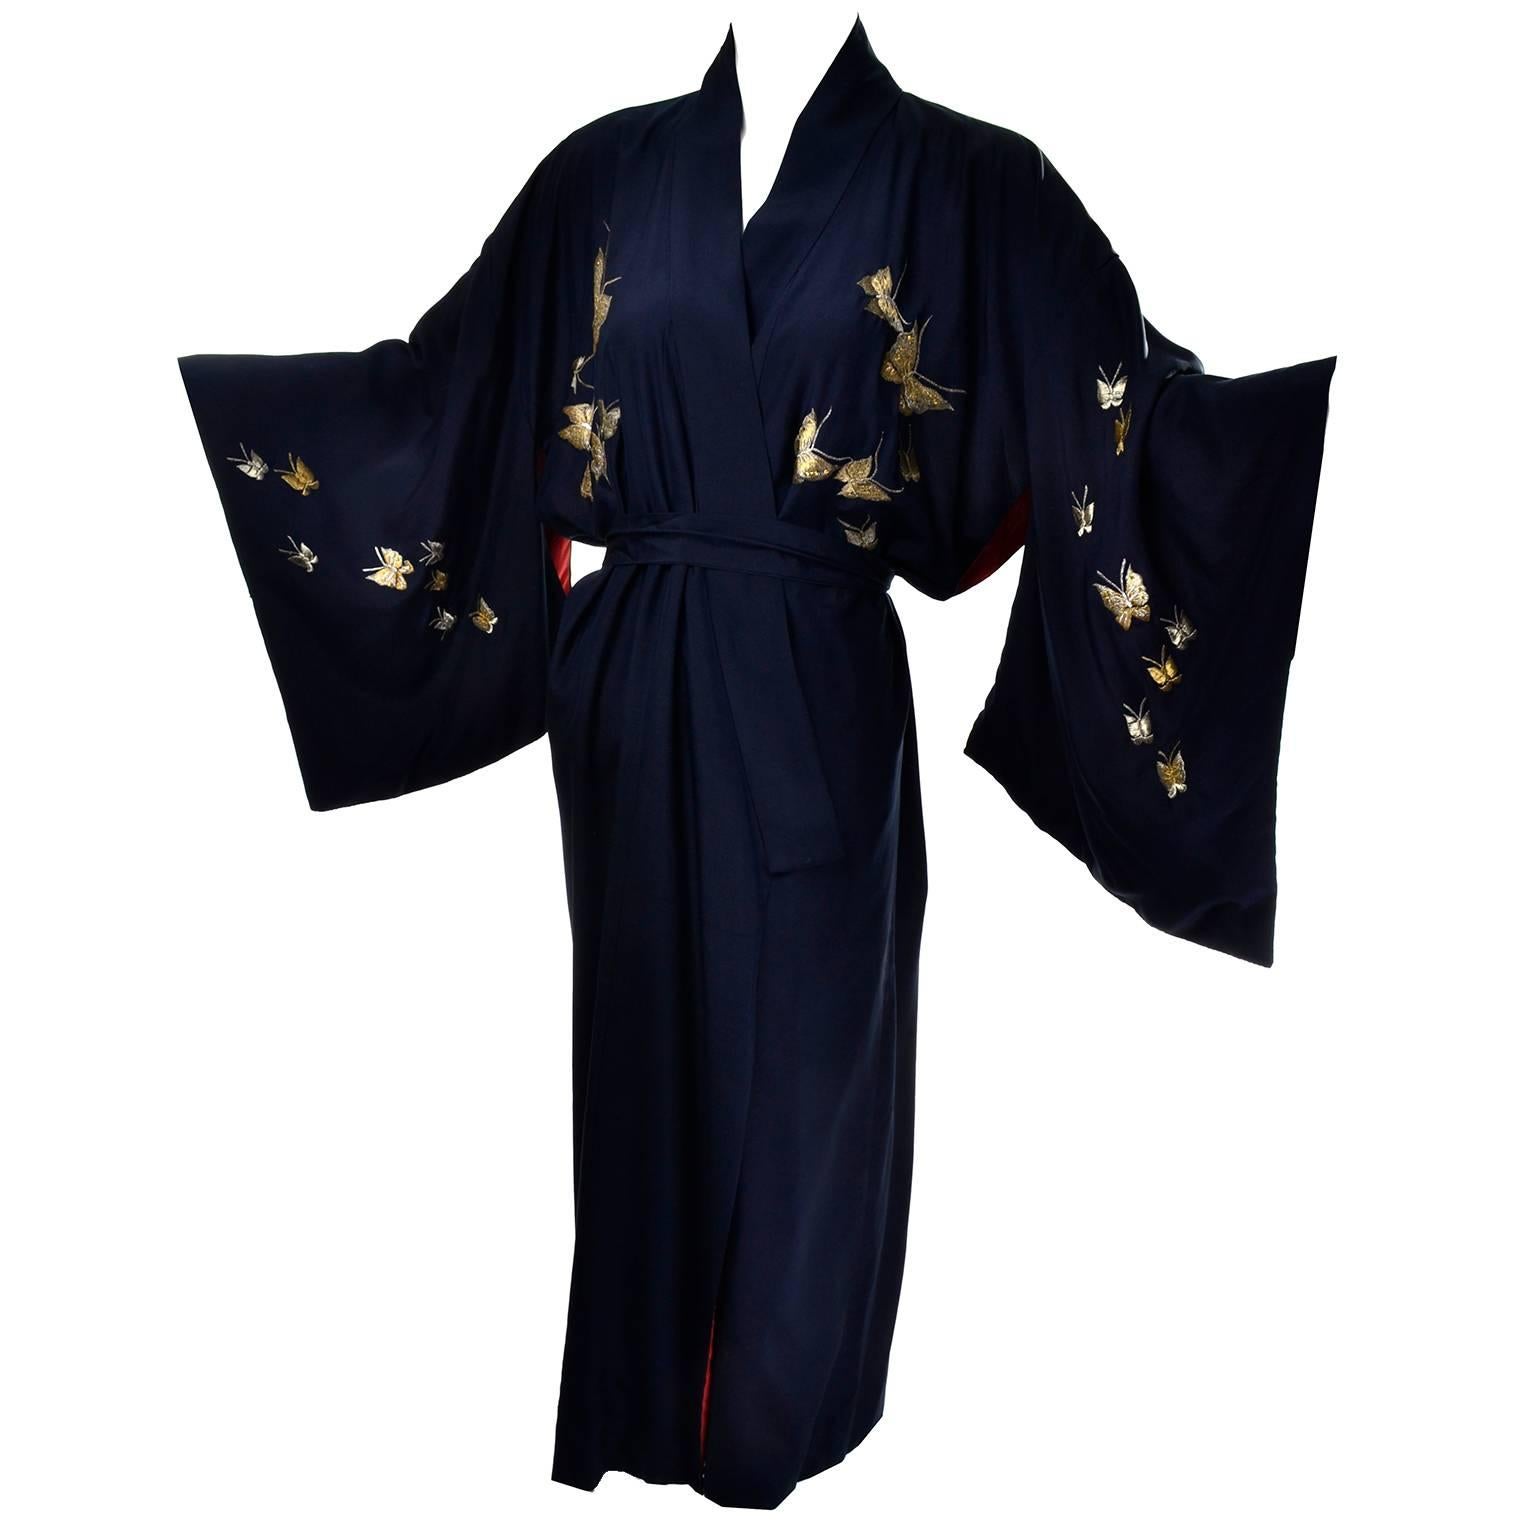 This is an incredible vintage kimono! The midnight blue silk is embroidered with butterflies in gold metallic thread and the piece is lined in deep pink, almost red silk.  We love vintage kimonos and this one is truly exceptional! Made in Japan